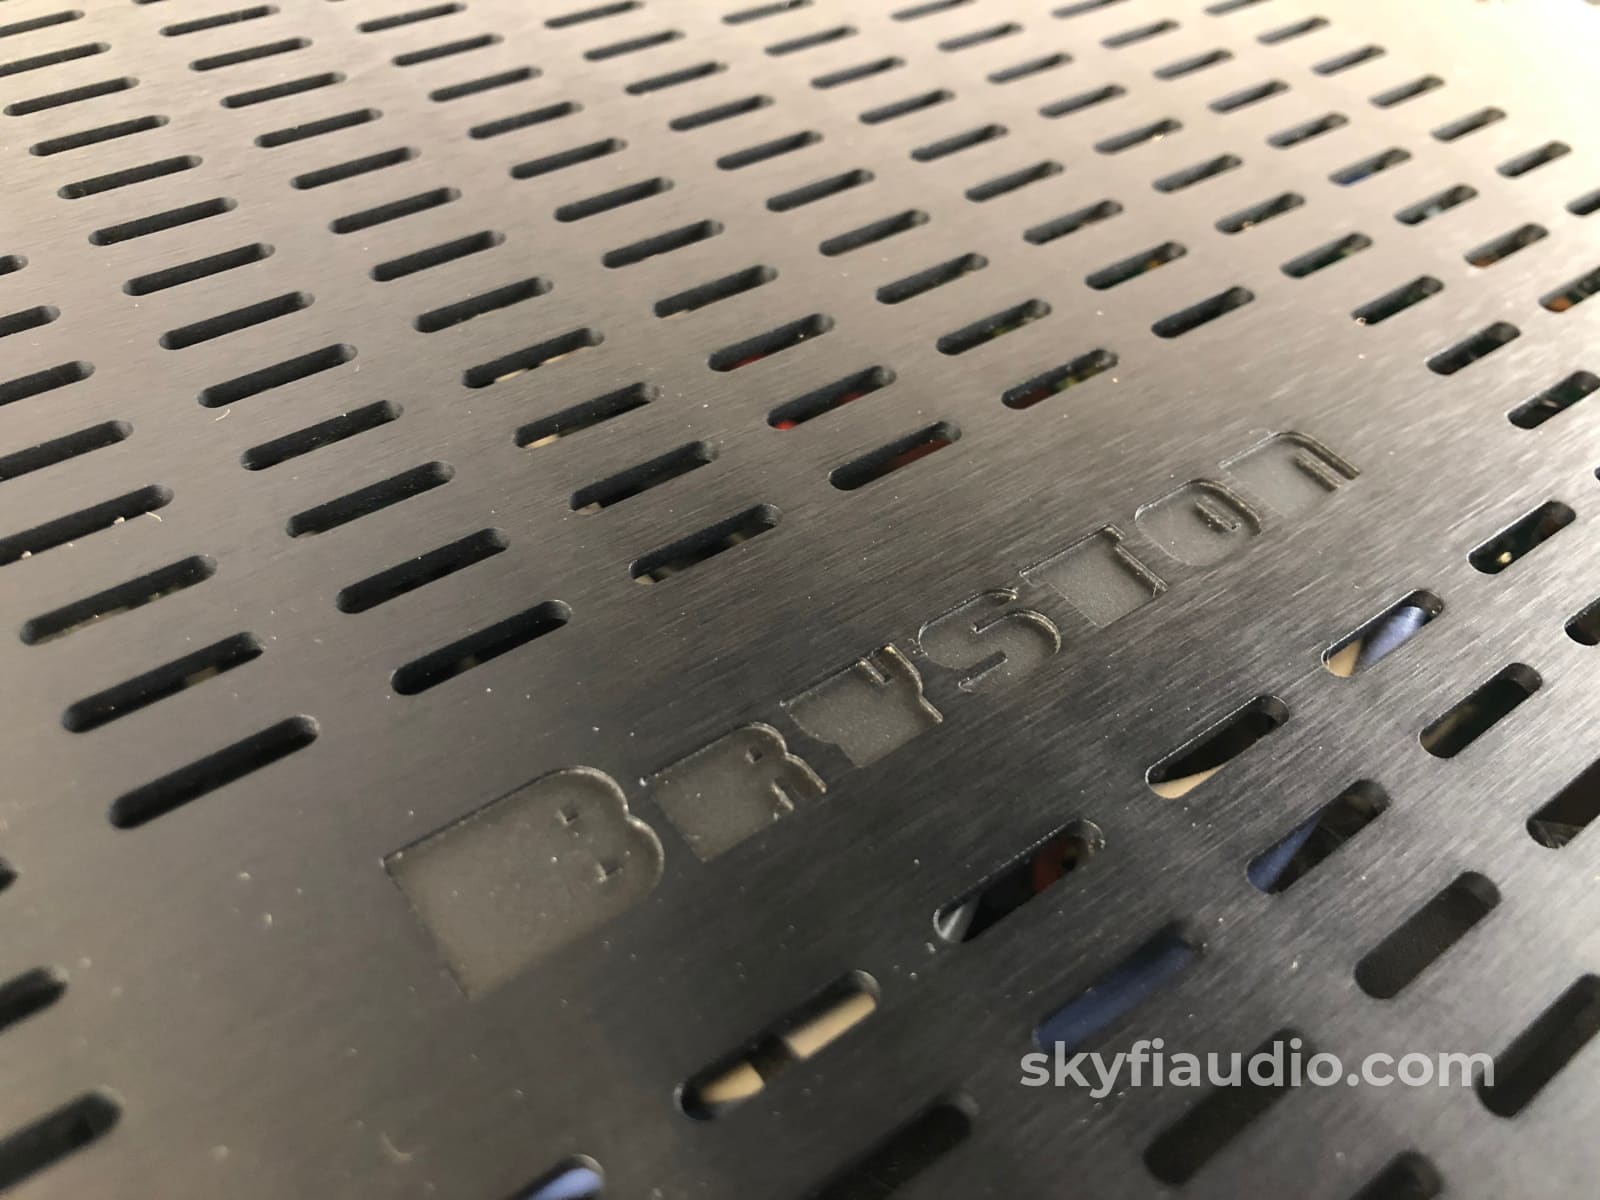 Bryston 4B-Sst2 Amplifier - Barely Used And Complete